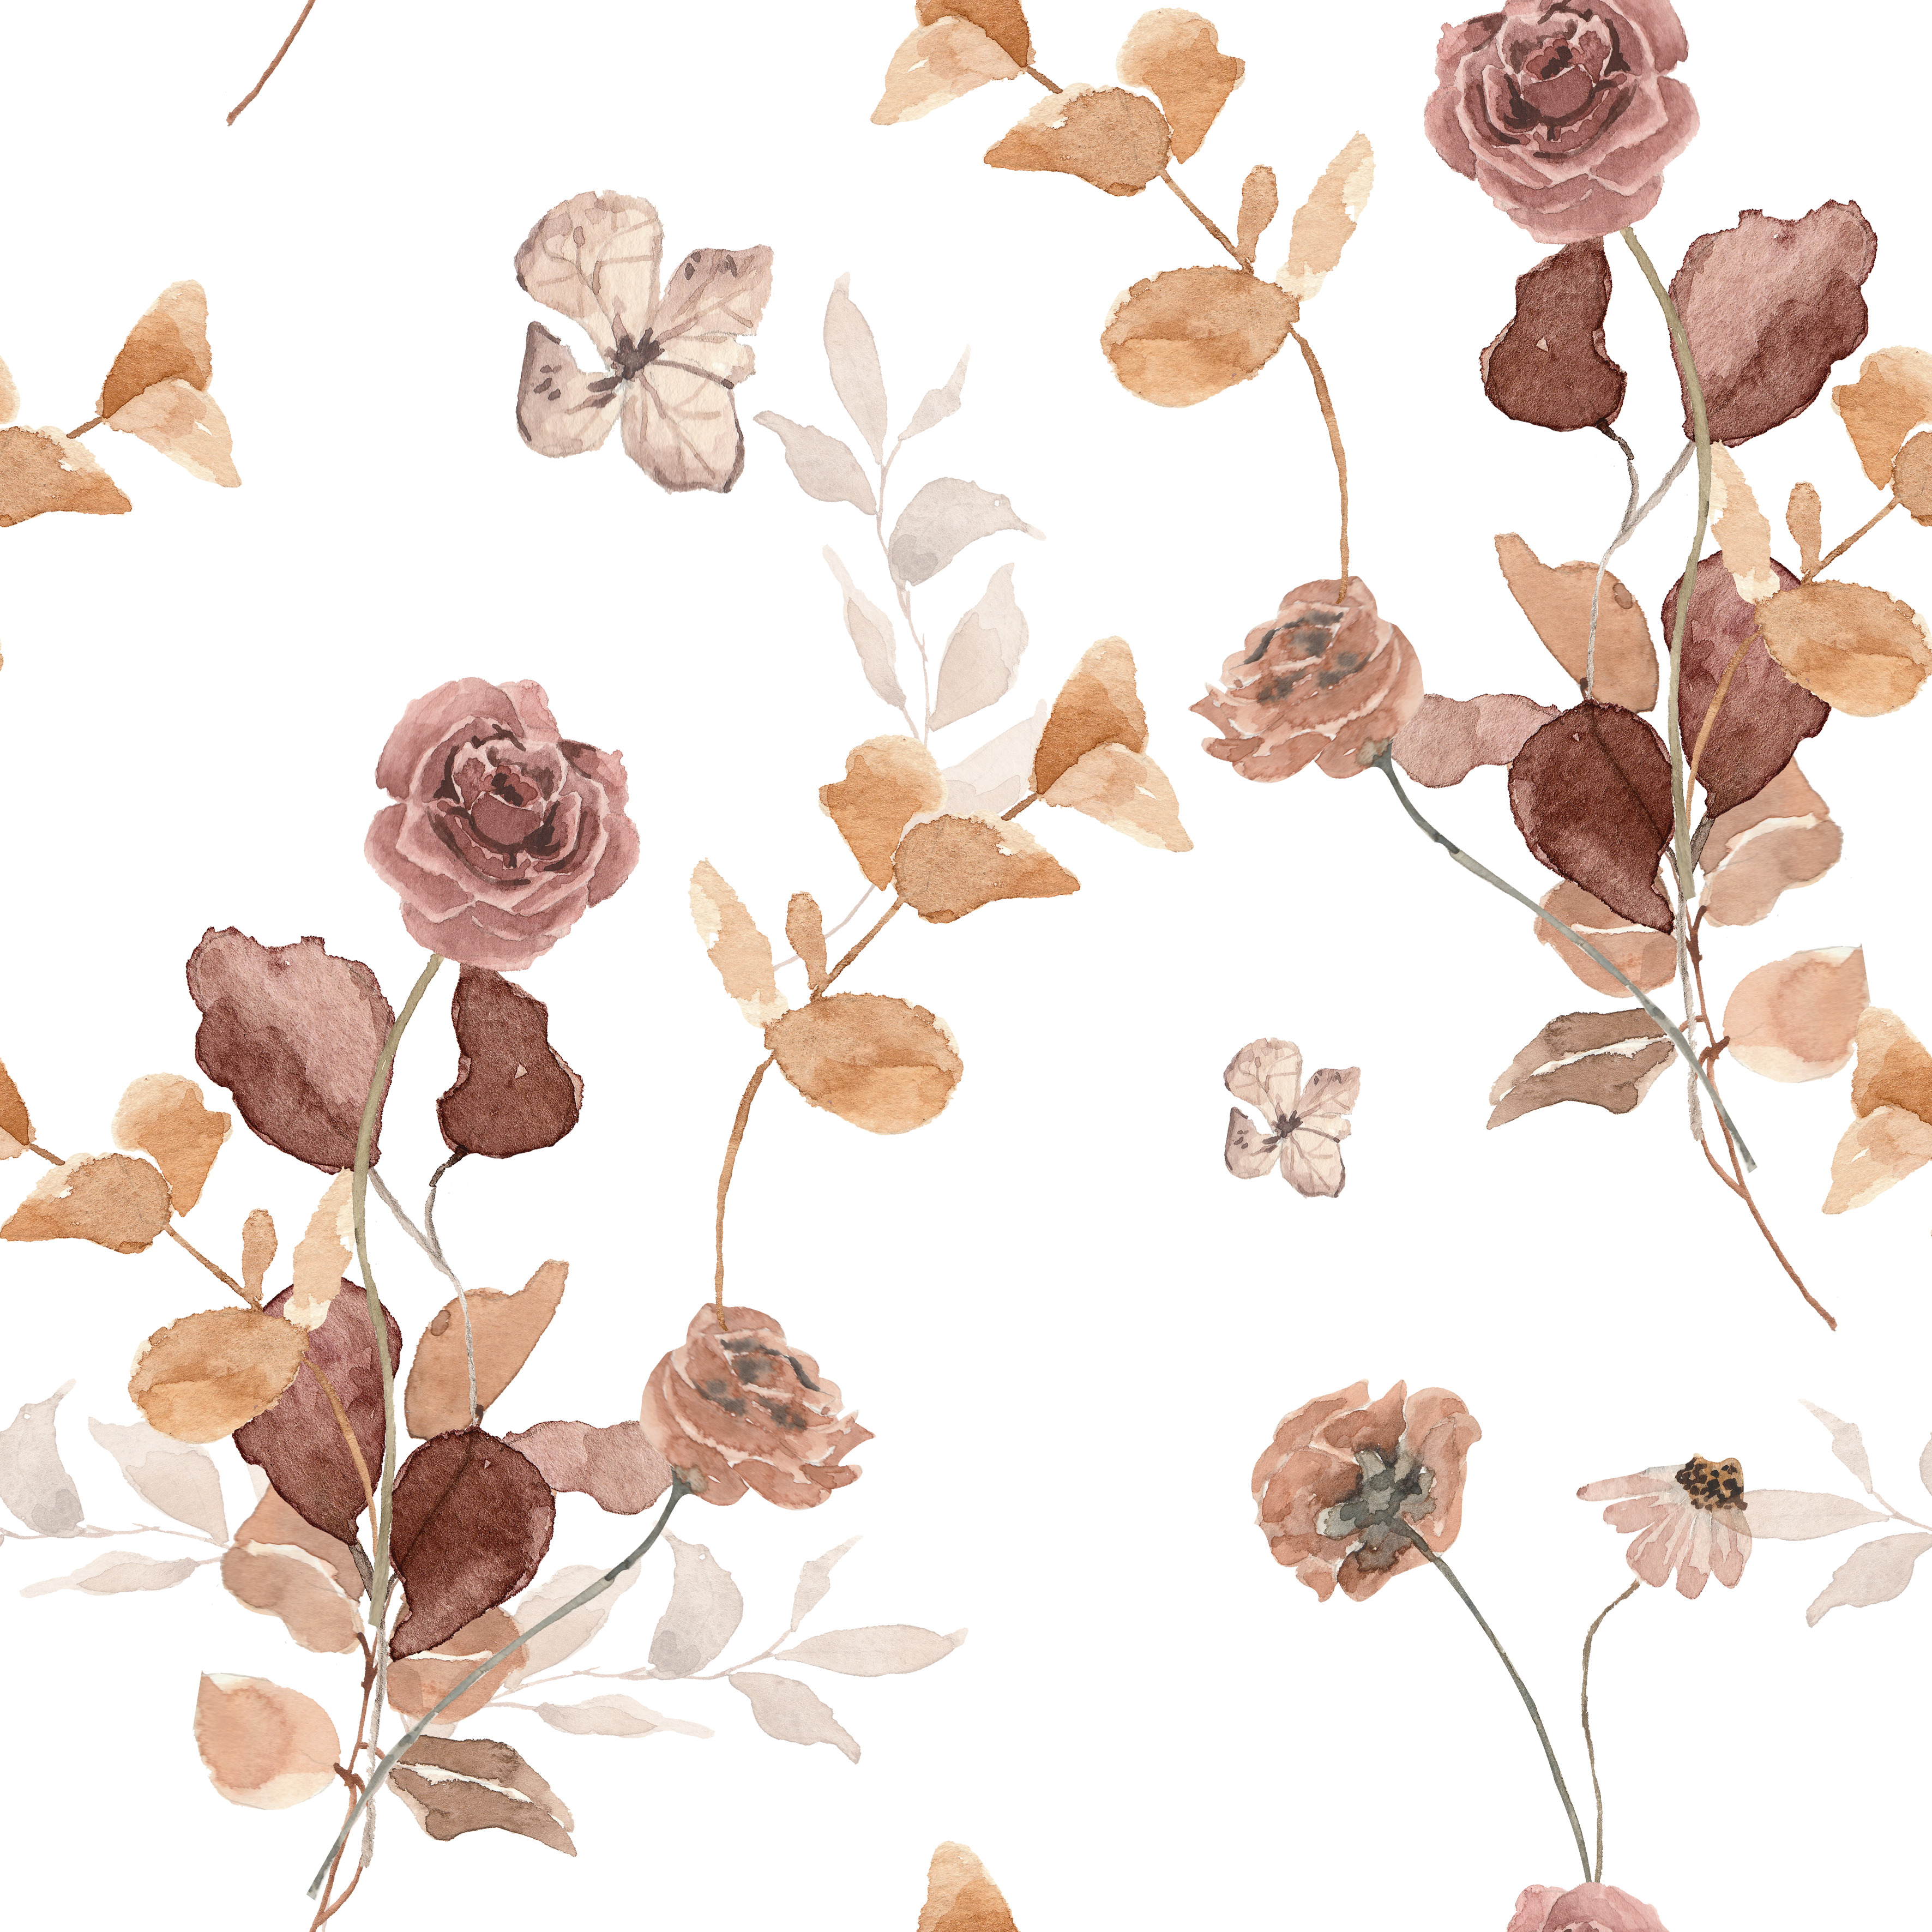 A close-up view of Autumn Floral Wallpaper, displaying detailed and delicate floral designs with roses and butterflies in soft watercolor tones of rose, beige, and muted greens on a clean white background.